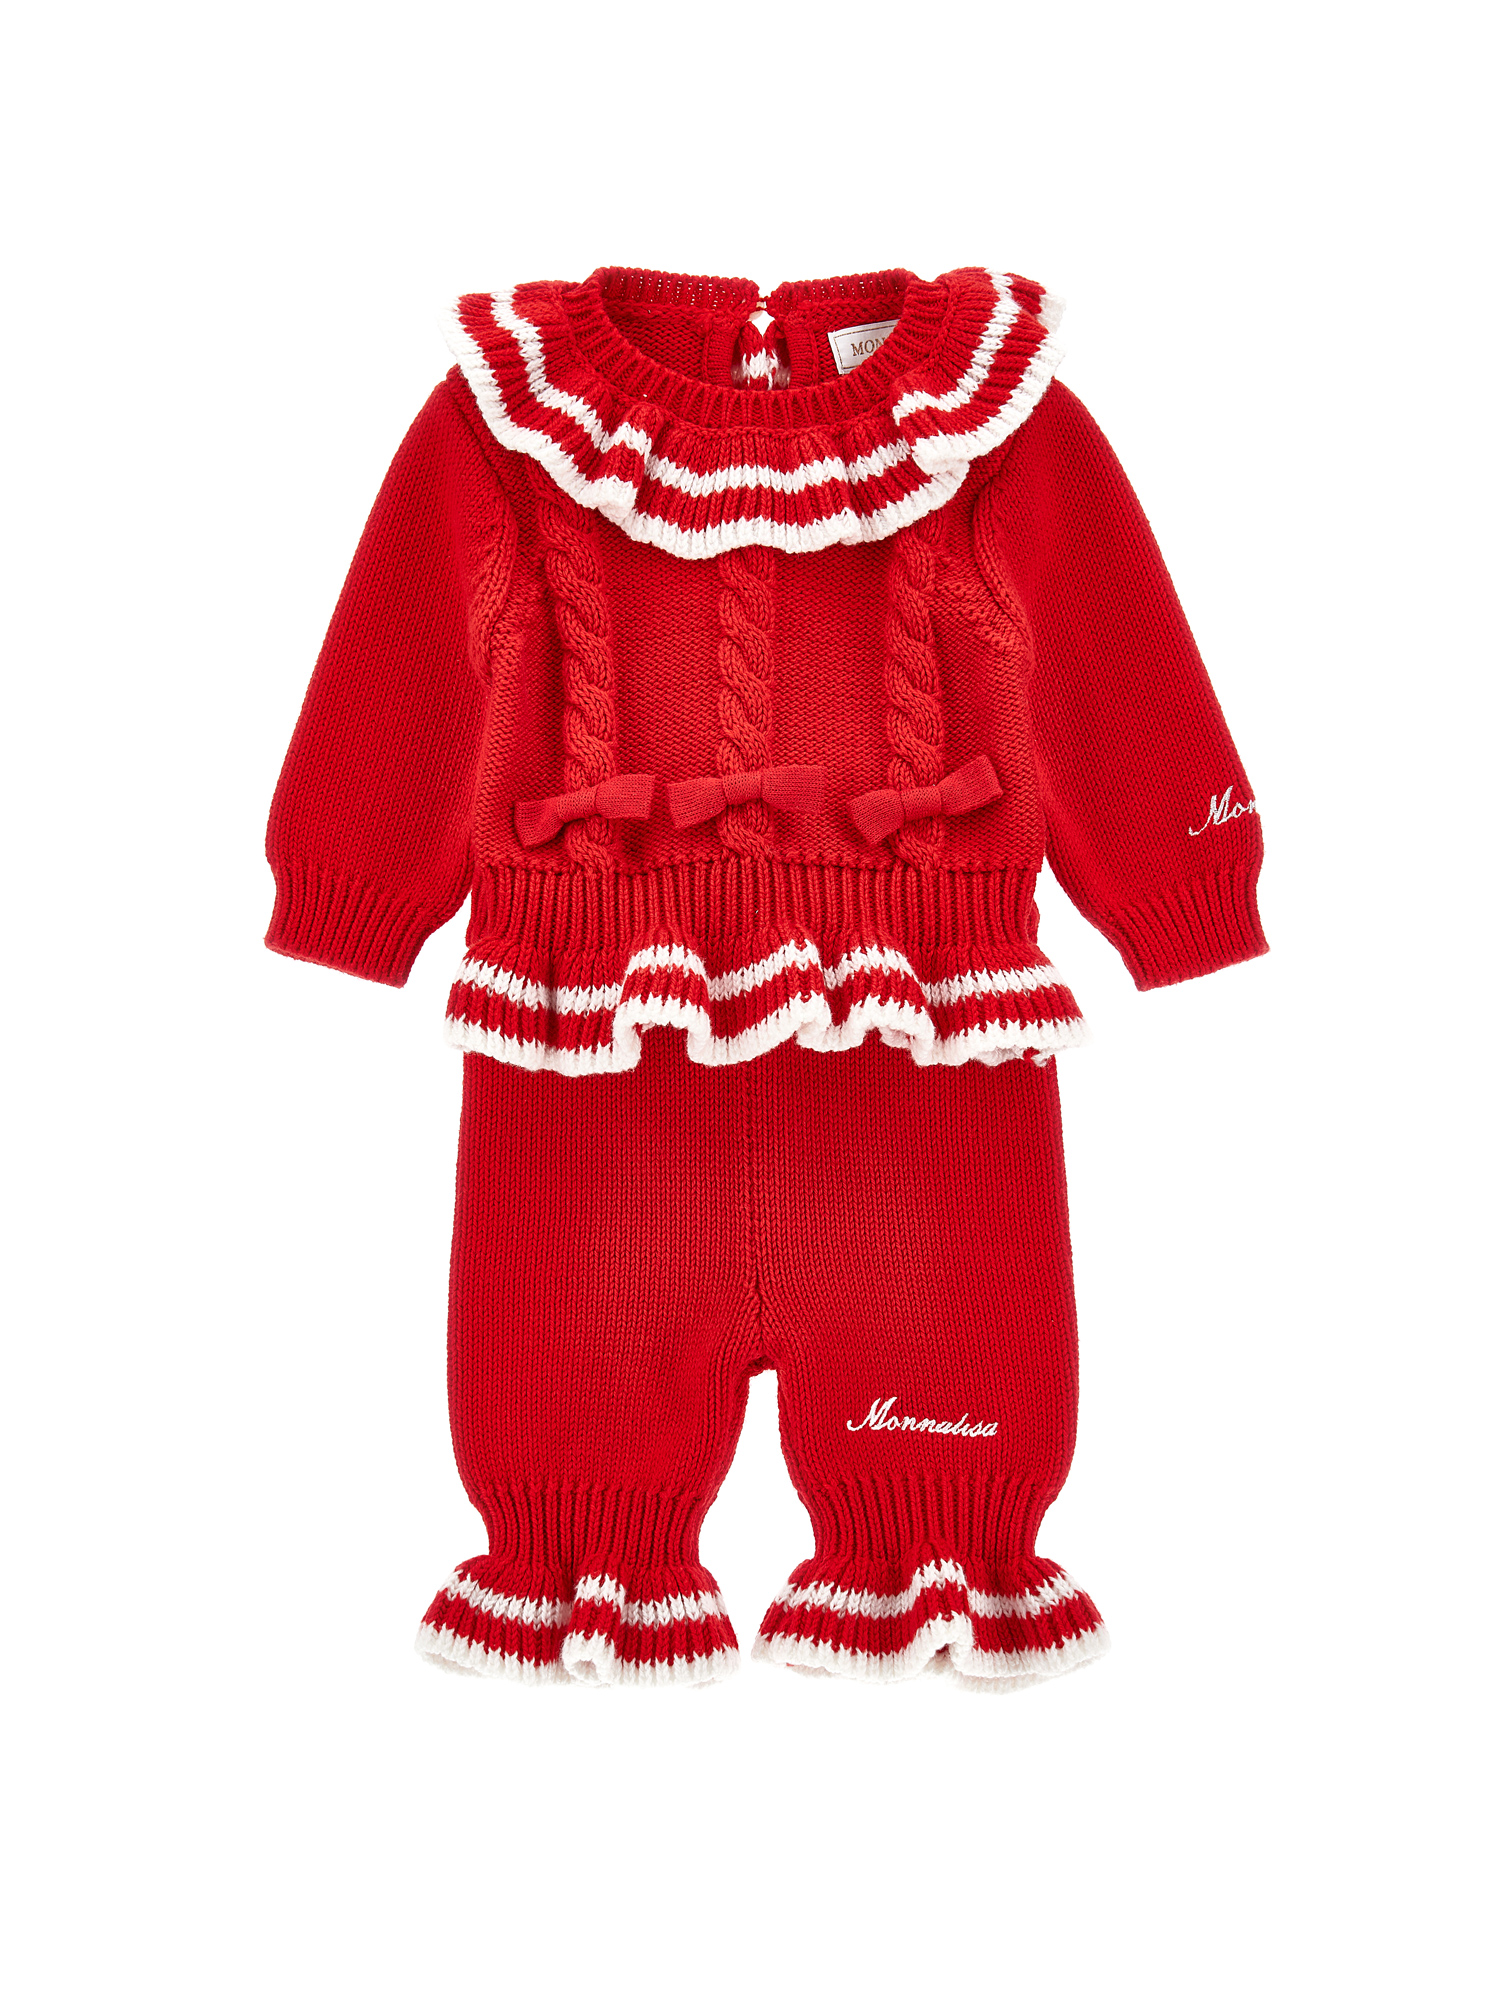 Monnalisa Babies'   Two-piece Knitted Set In Red + Cream